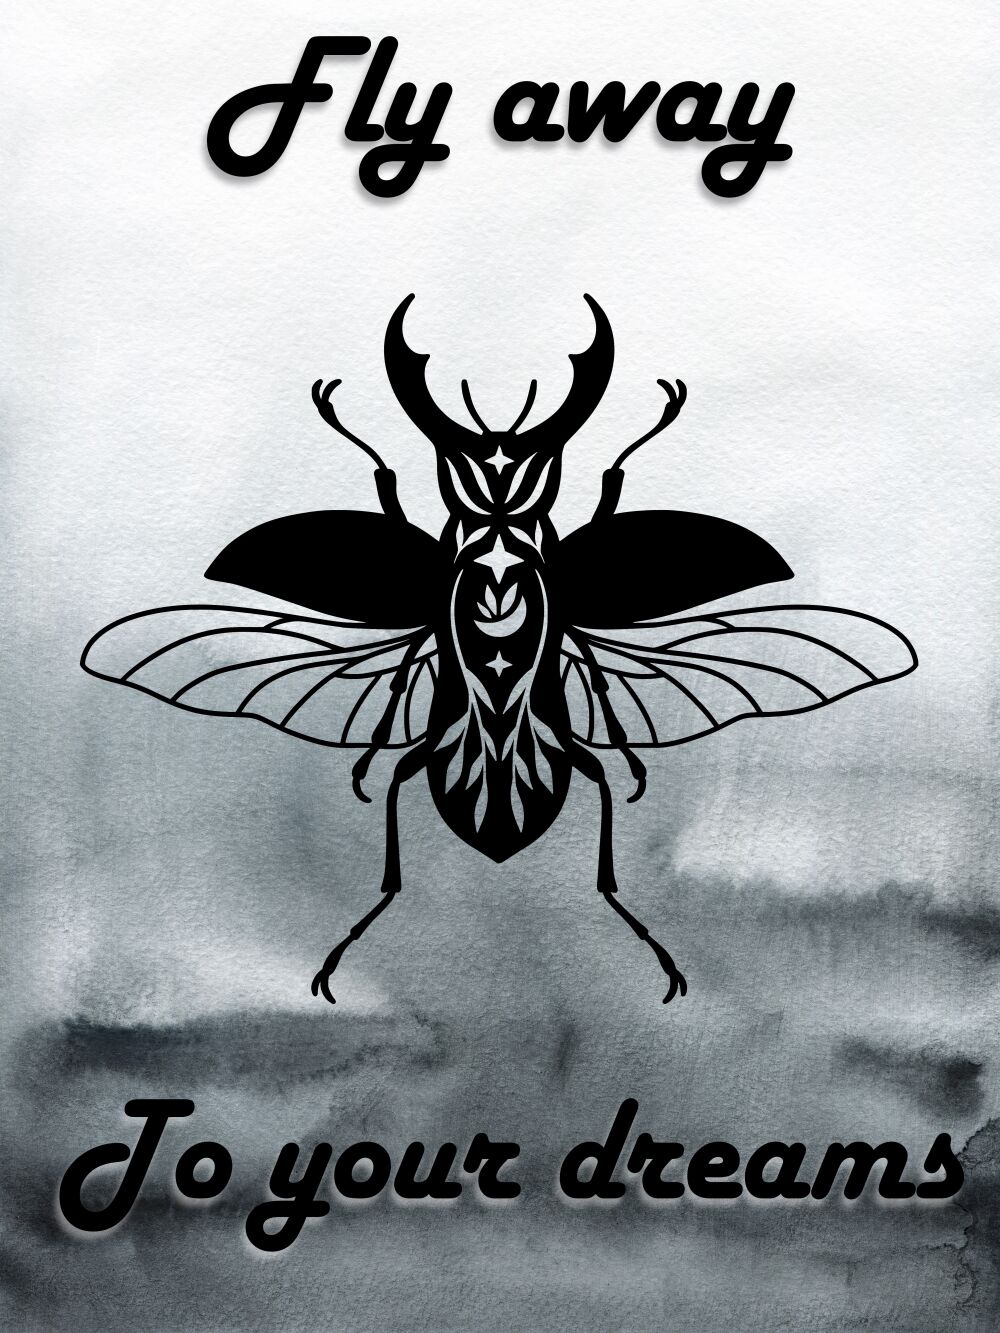 Fly away to your dreams